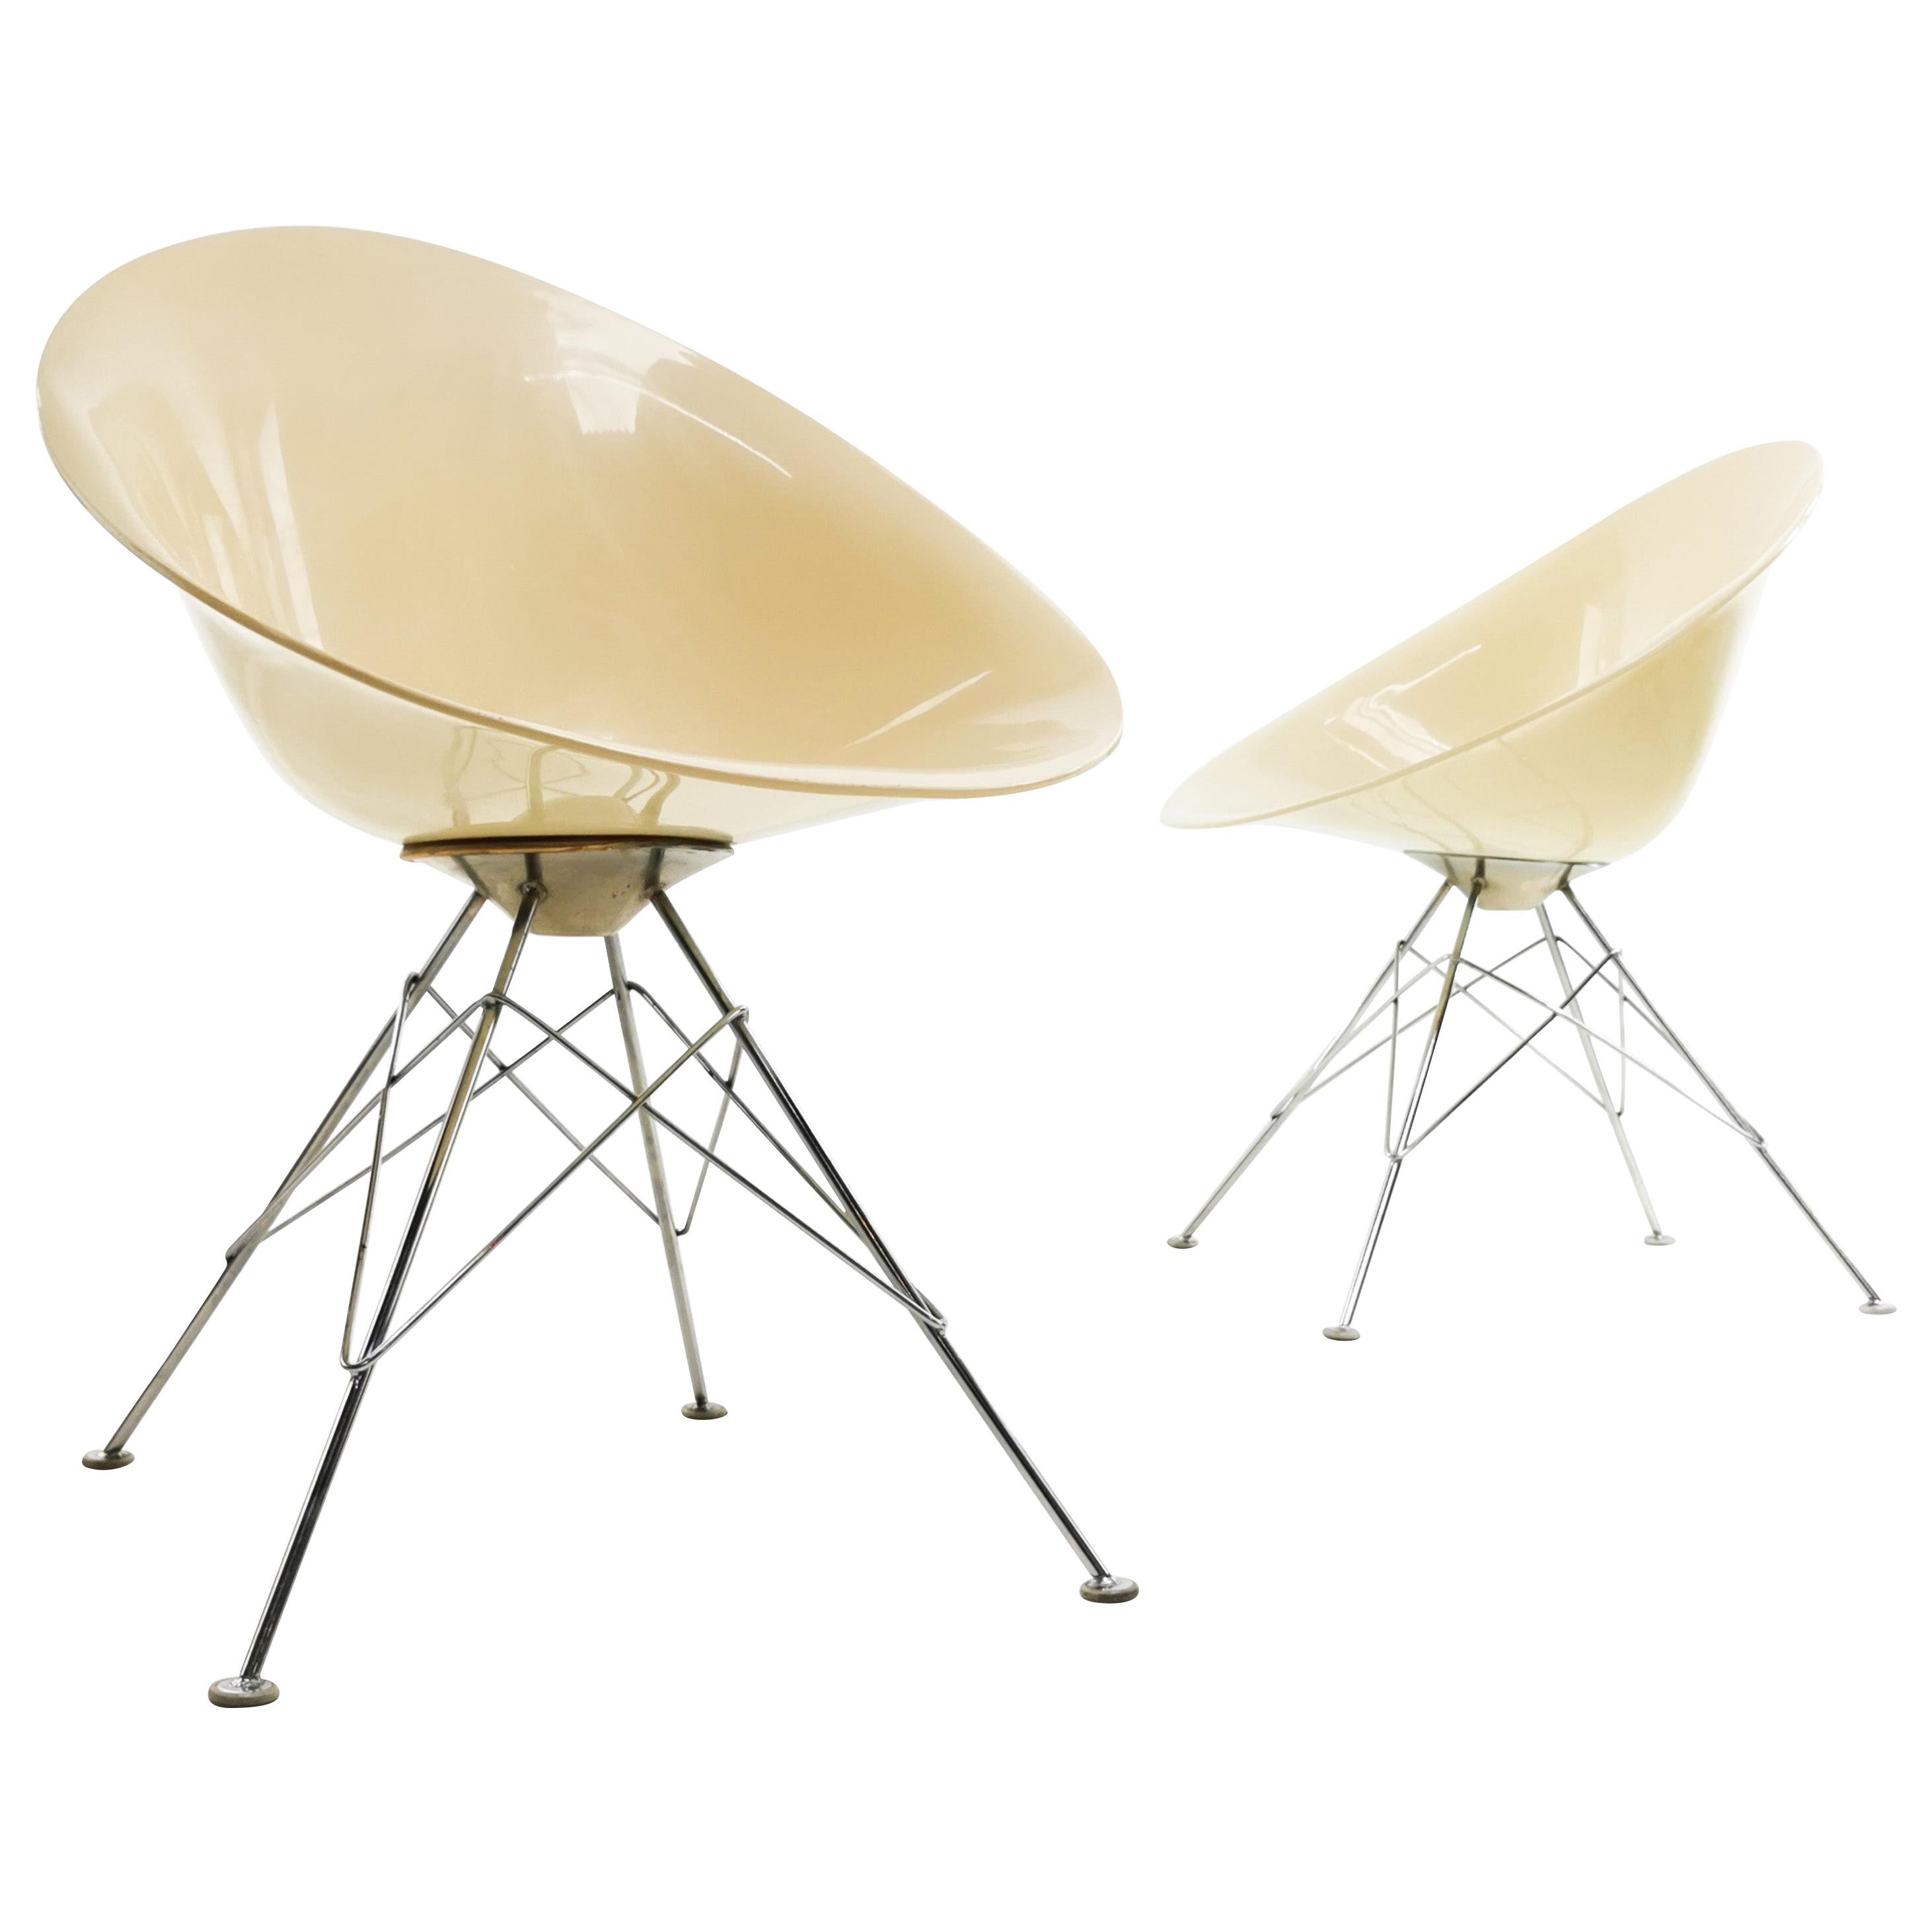 Kartell Philippe Starck Eros Lucite and Chrome Chairs, Midcentury